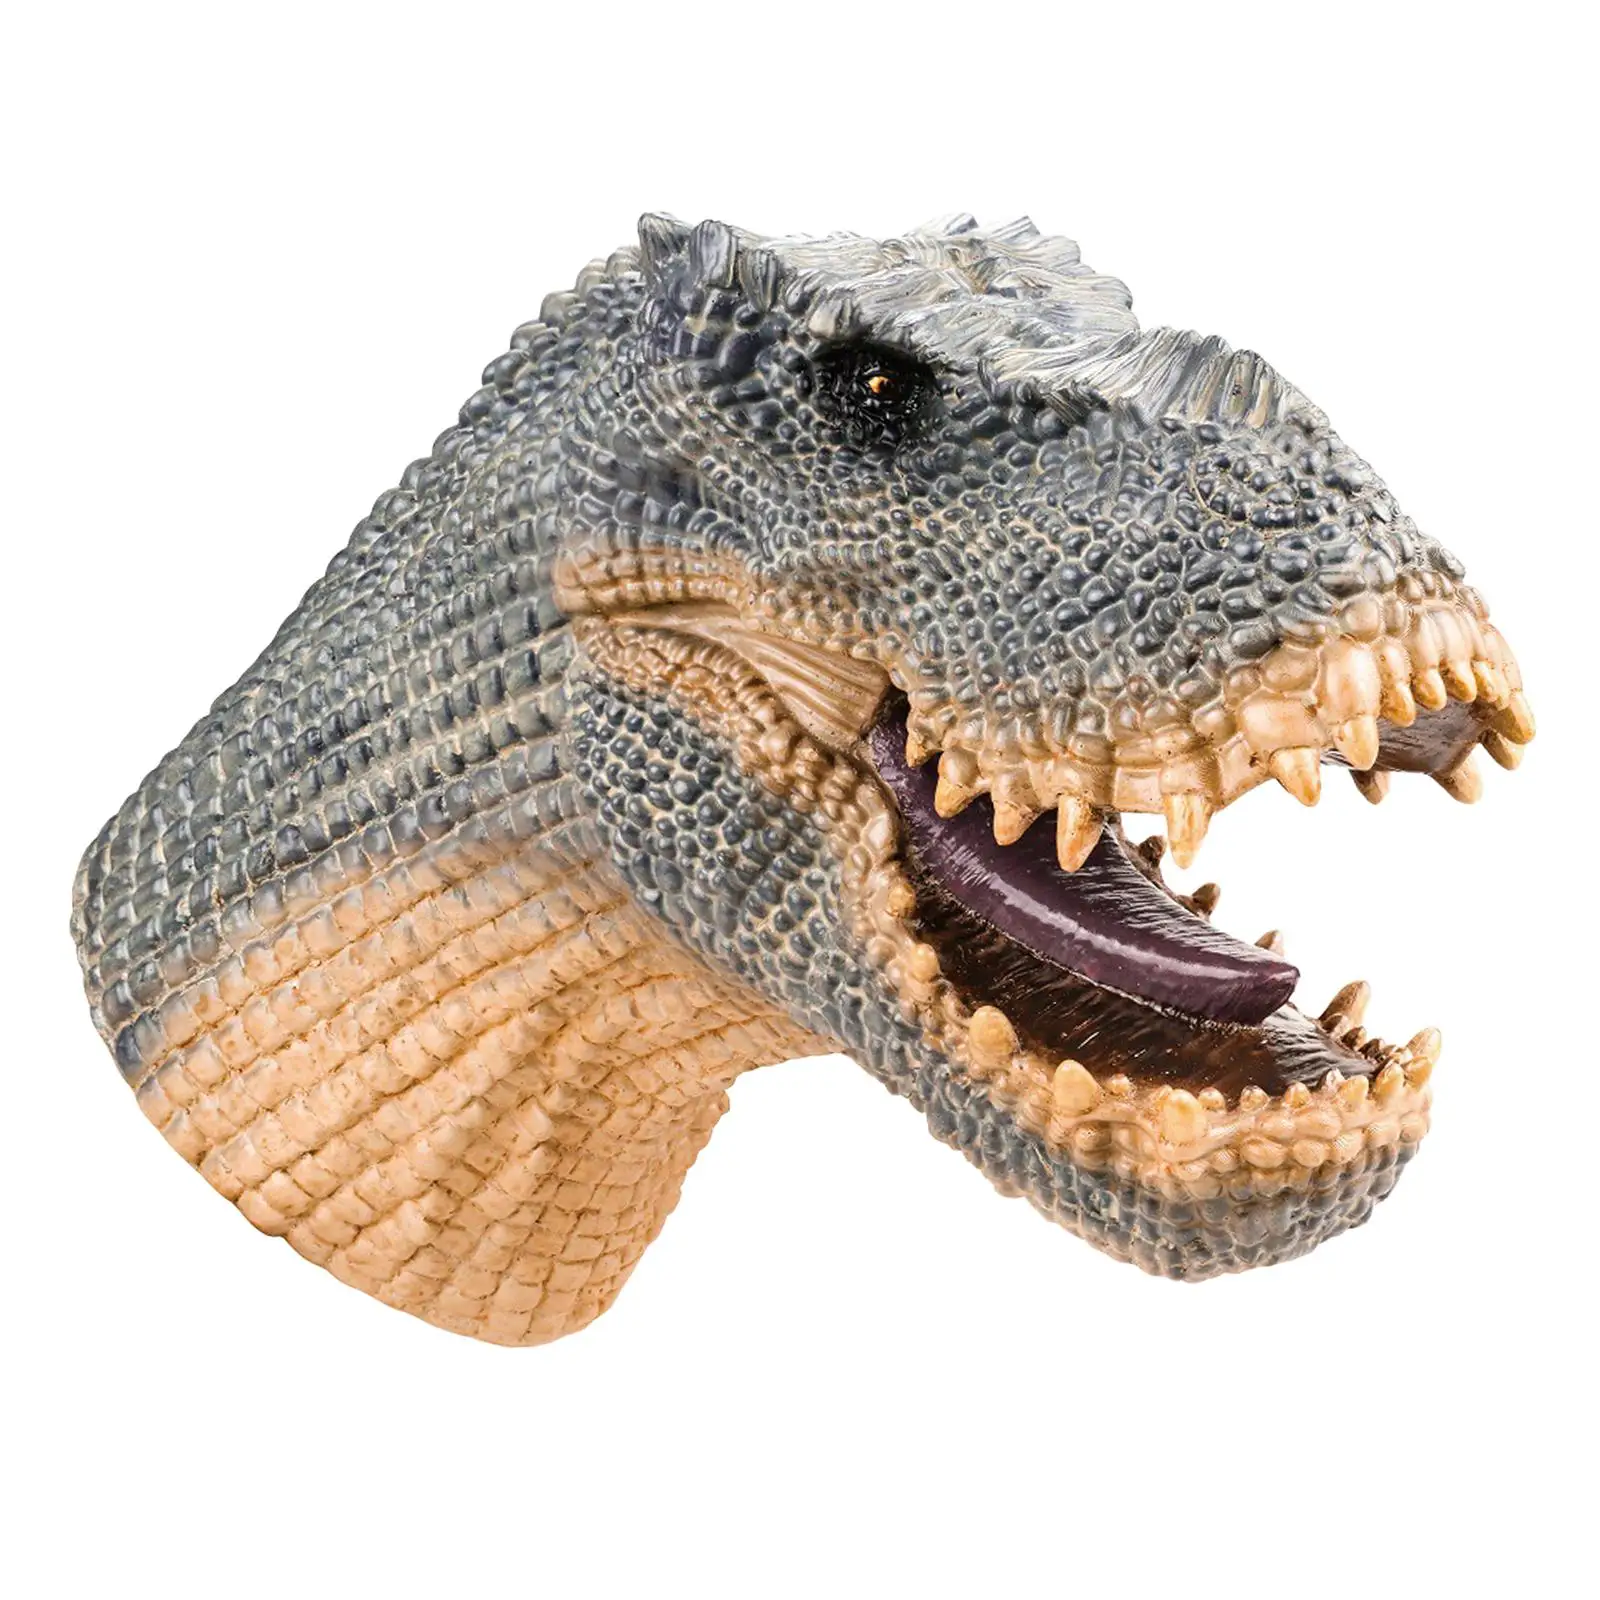 Simulation Dinosaur Hand Puppet Interactive Toys Vinyl Party Favor Gloves for Parties Role Play Games Boys Children Toddlers